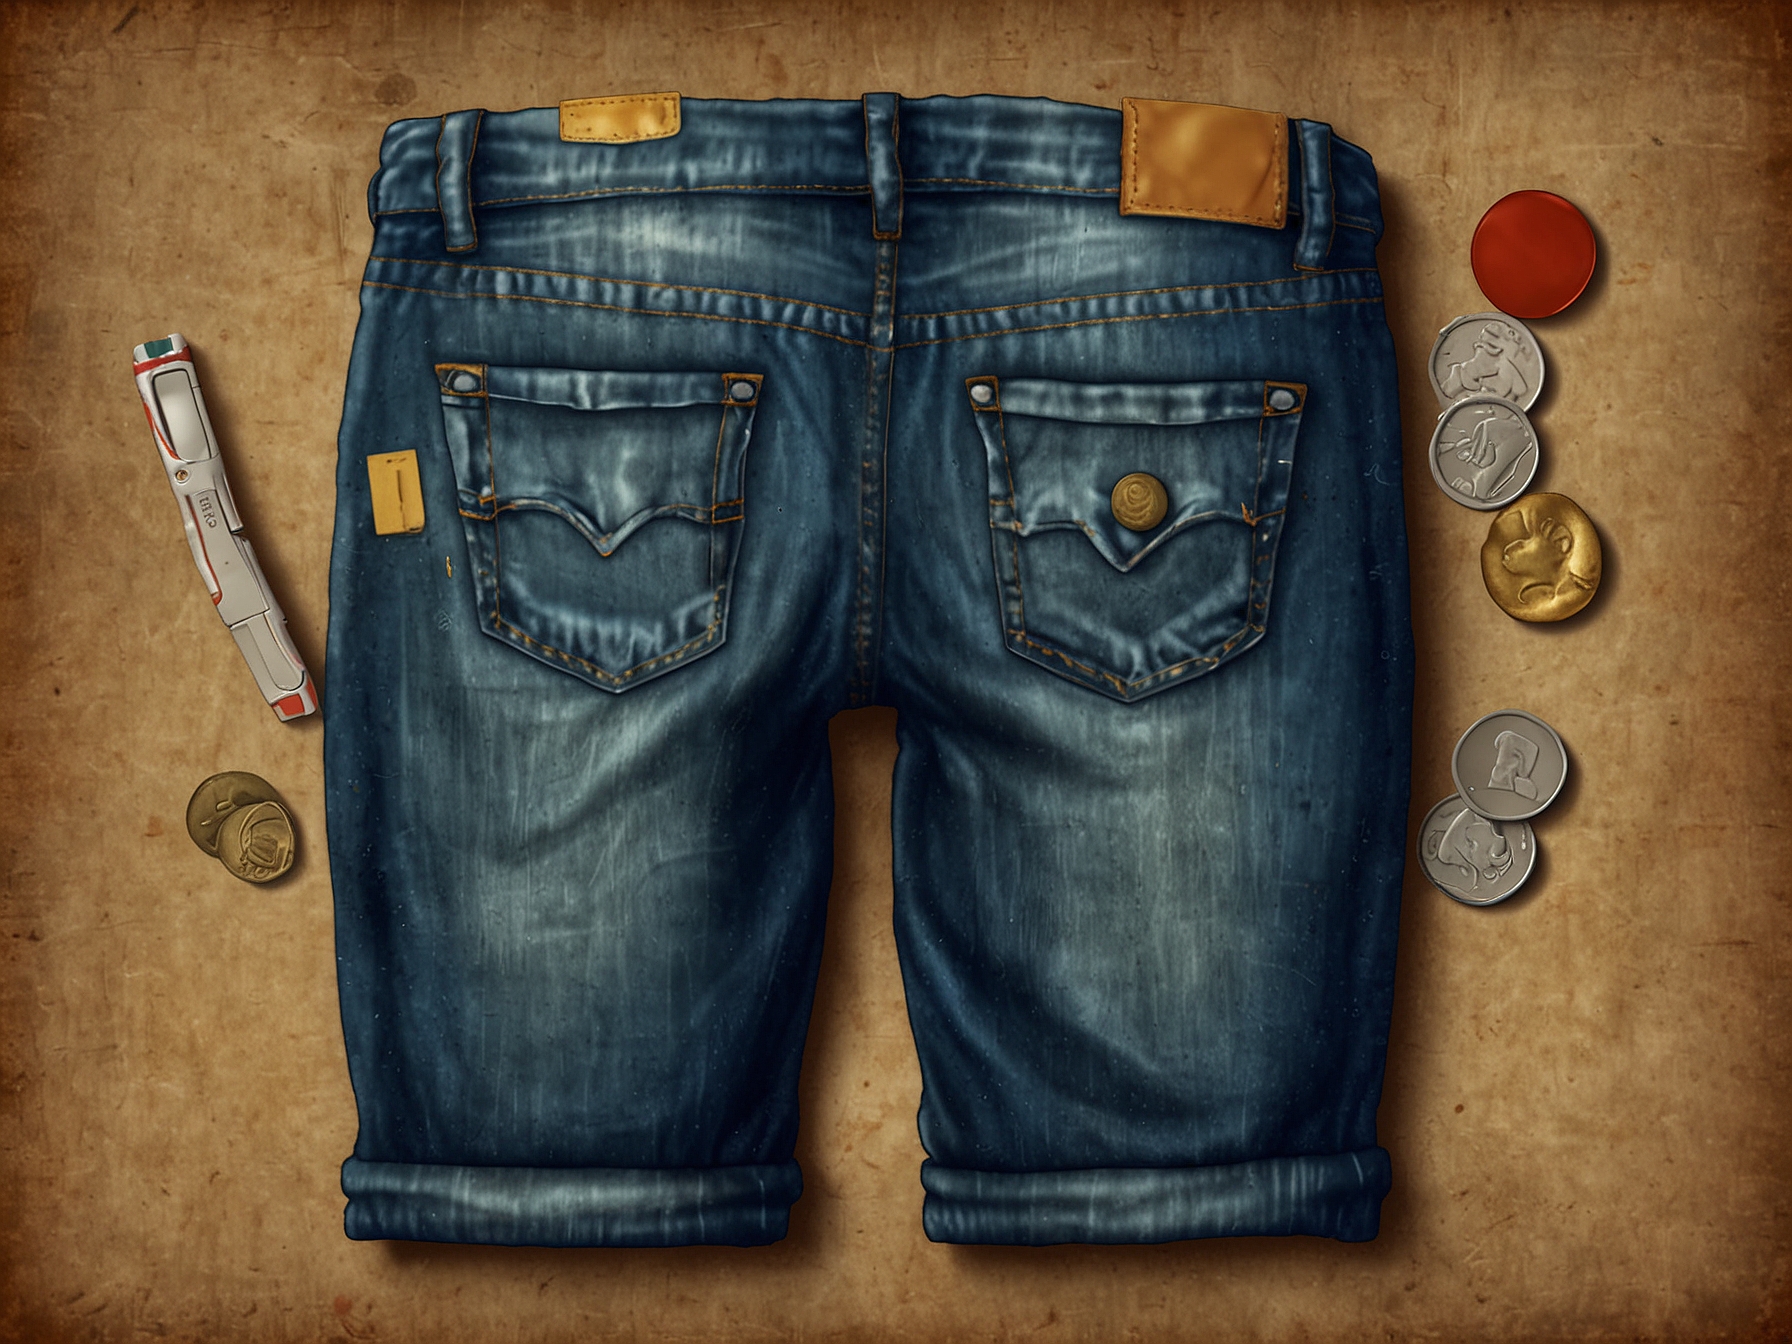 A modern pair of jeans displaying the tiny pocket, now repurposed to hold small items like coins, keys, and USB sticks, illustrating the blend of tradition and functionality.